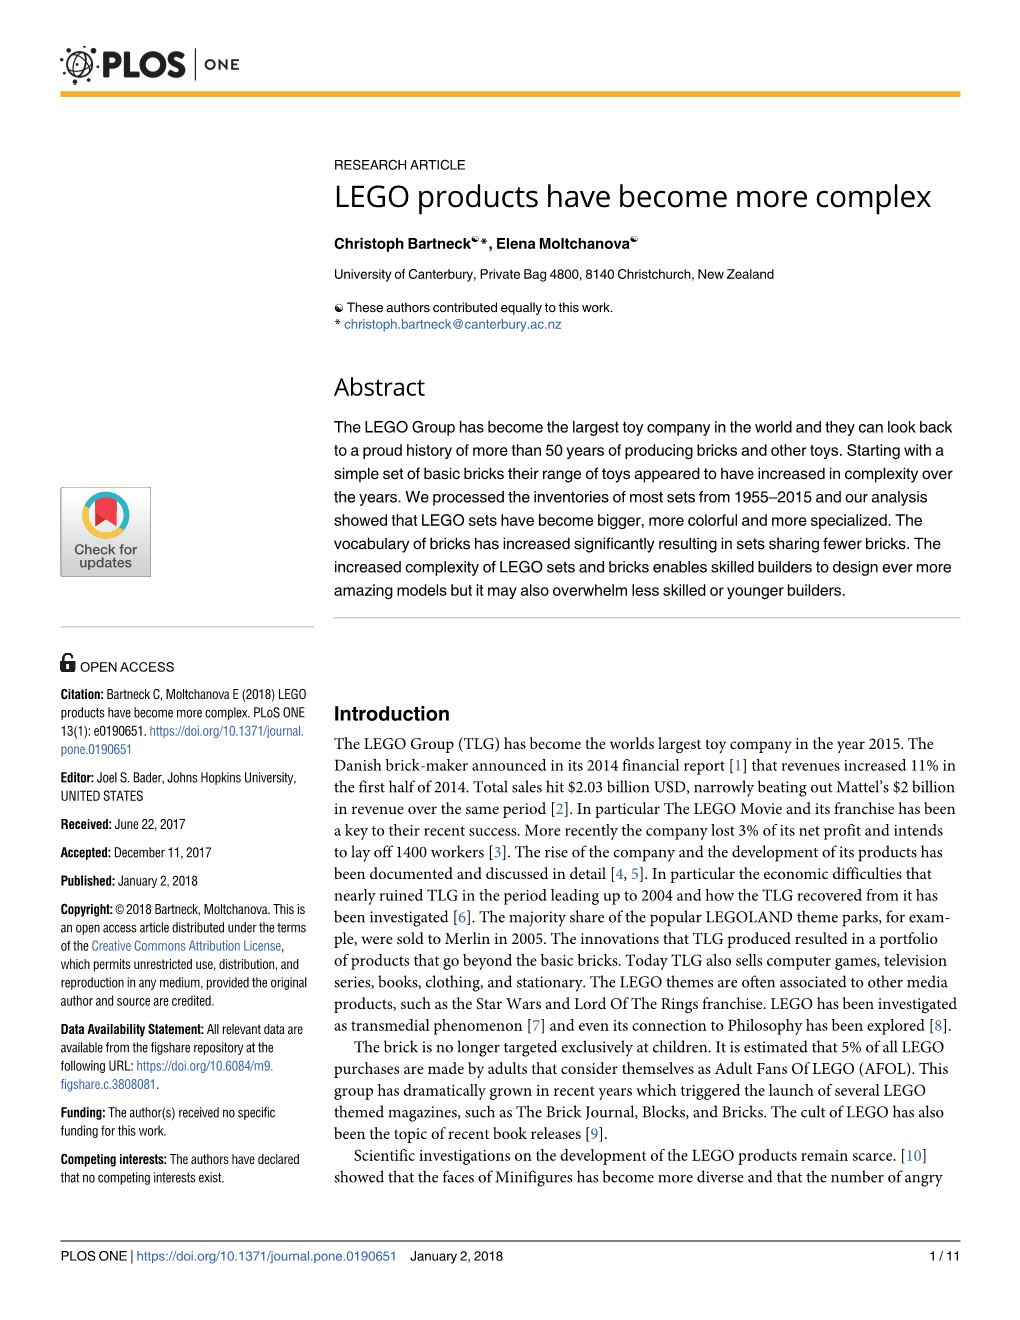 LEGO Products Have Become More Complex